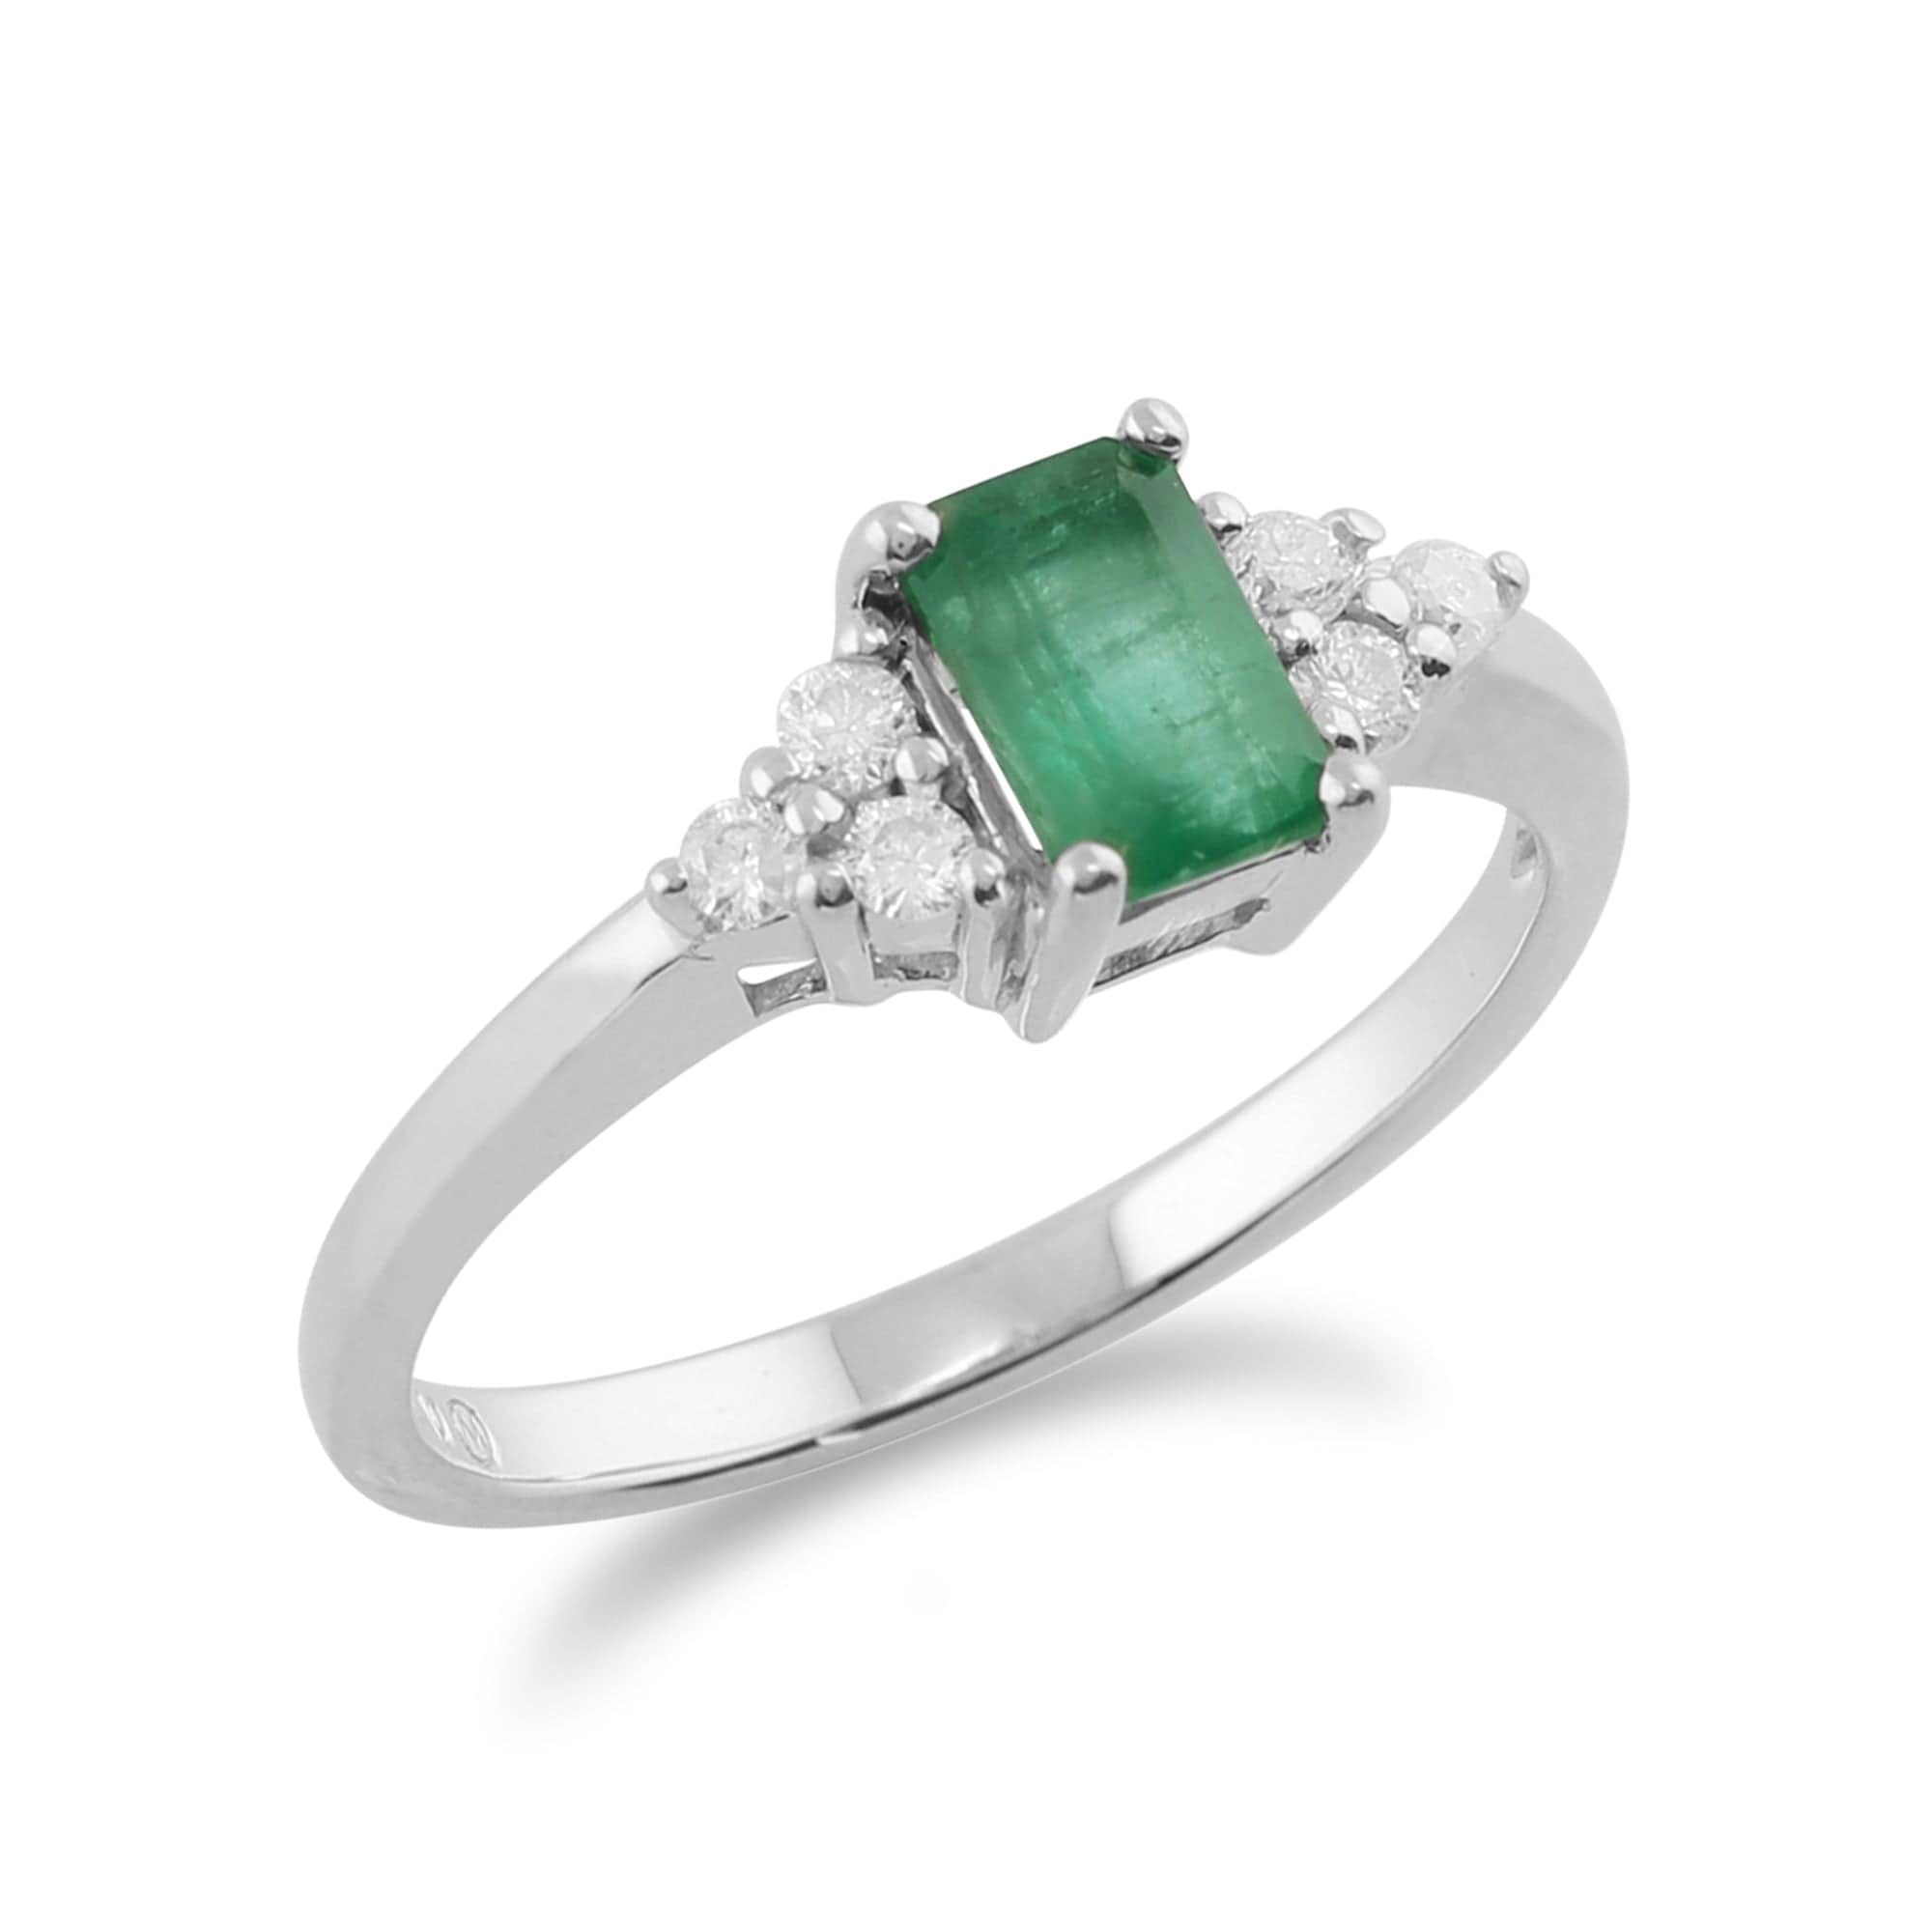 27013 Classic Baguette Emerald & Diamond Ring in 9ct White Gold 2